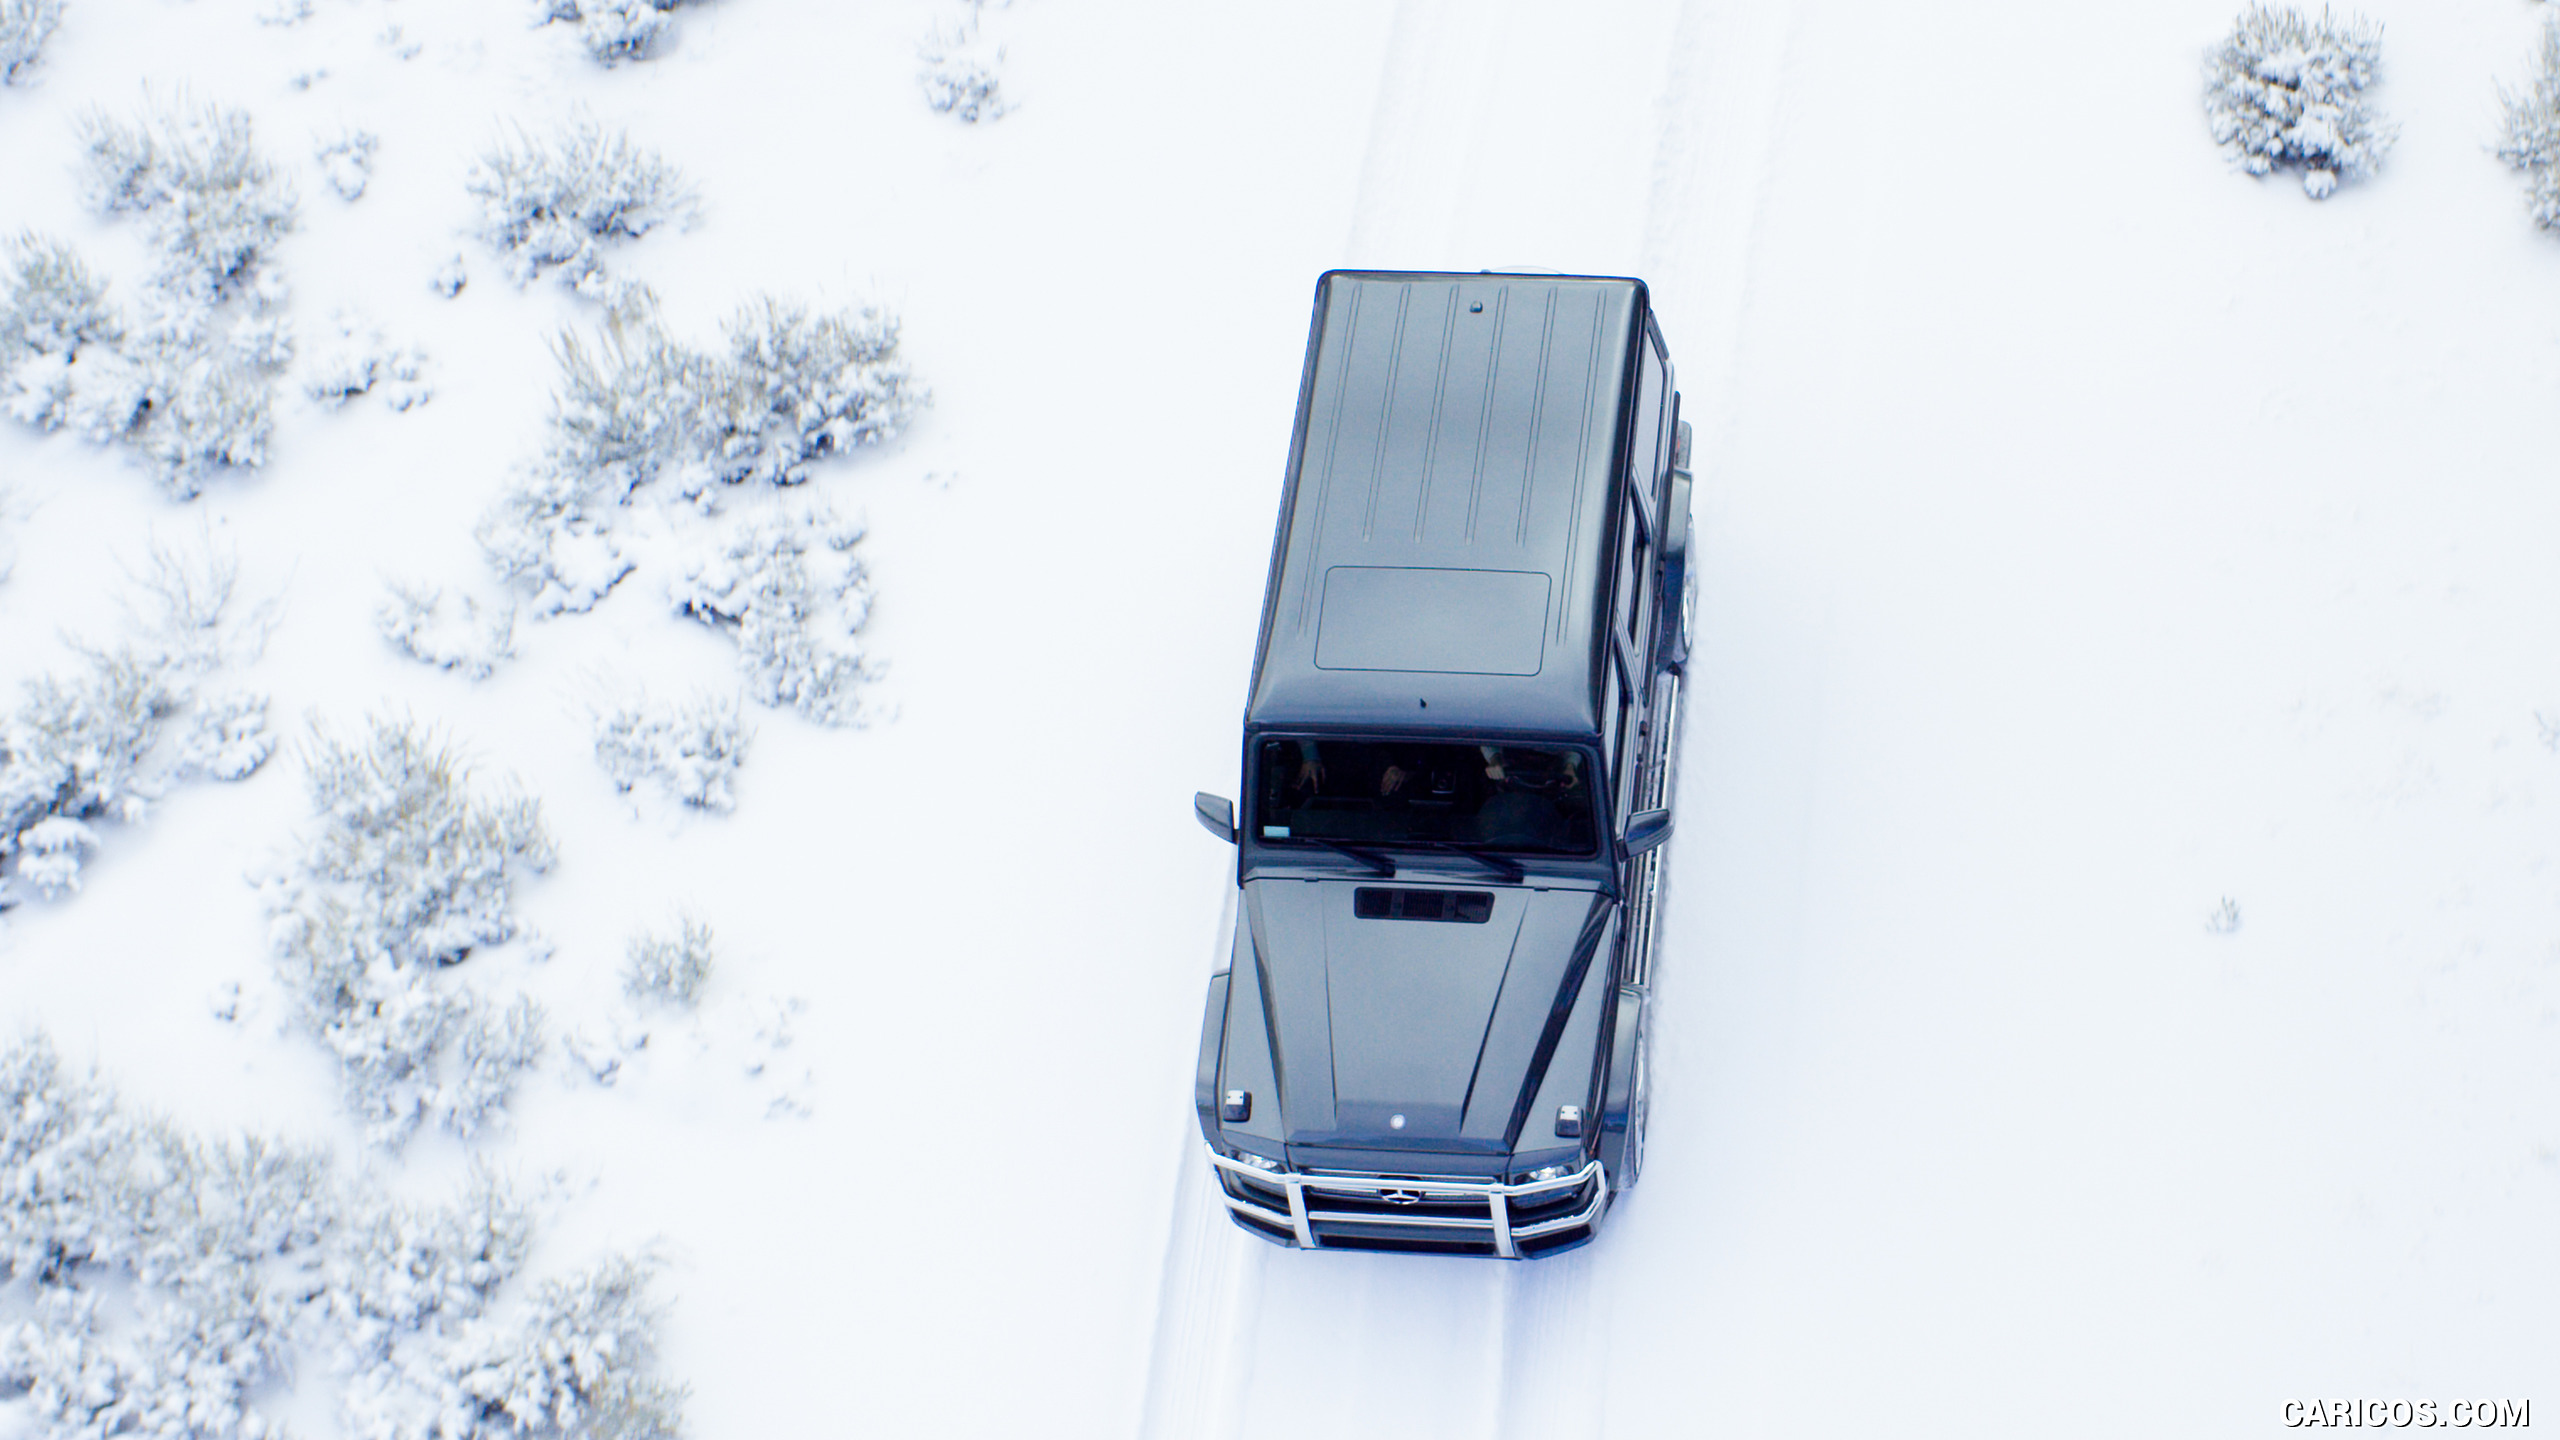 2017 Mercedes-AMG G65 AMG (US-Spec) in snow - Top, #35 of 45